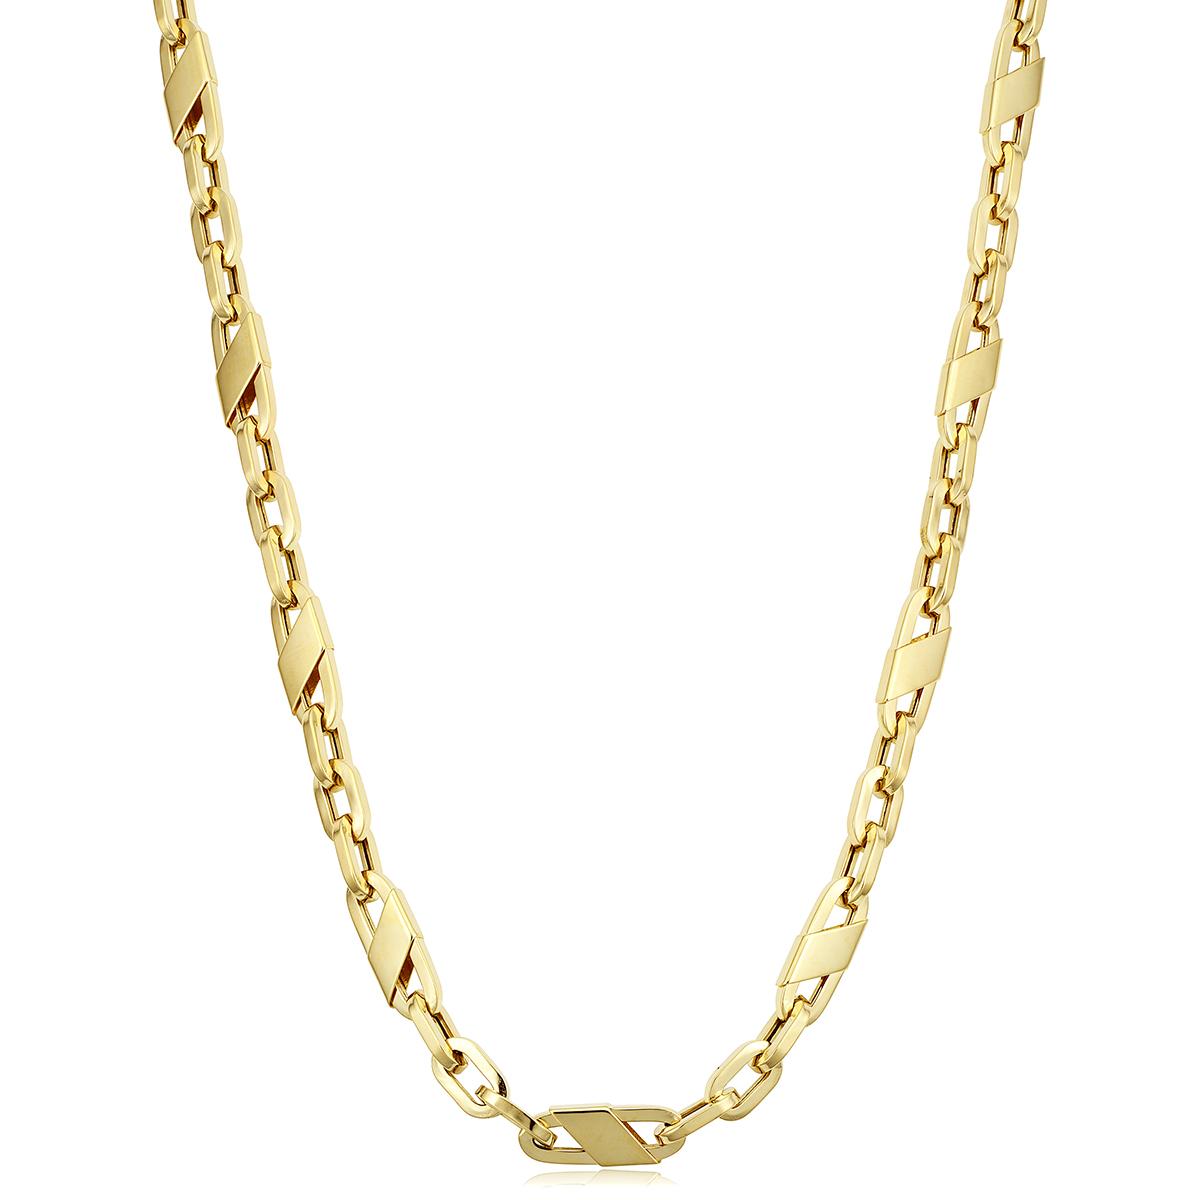 MODERN YELLOW GOLD FANCY MARINER LINK CHAIN - Howard's Jewelry Center